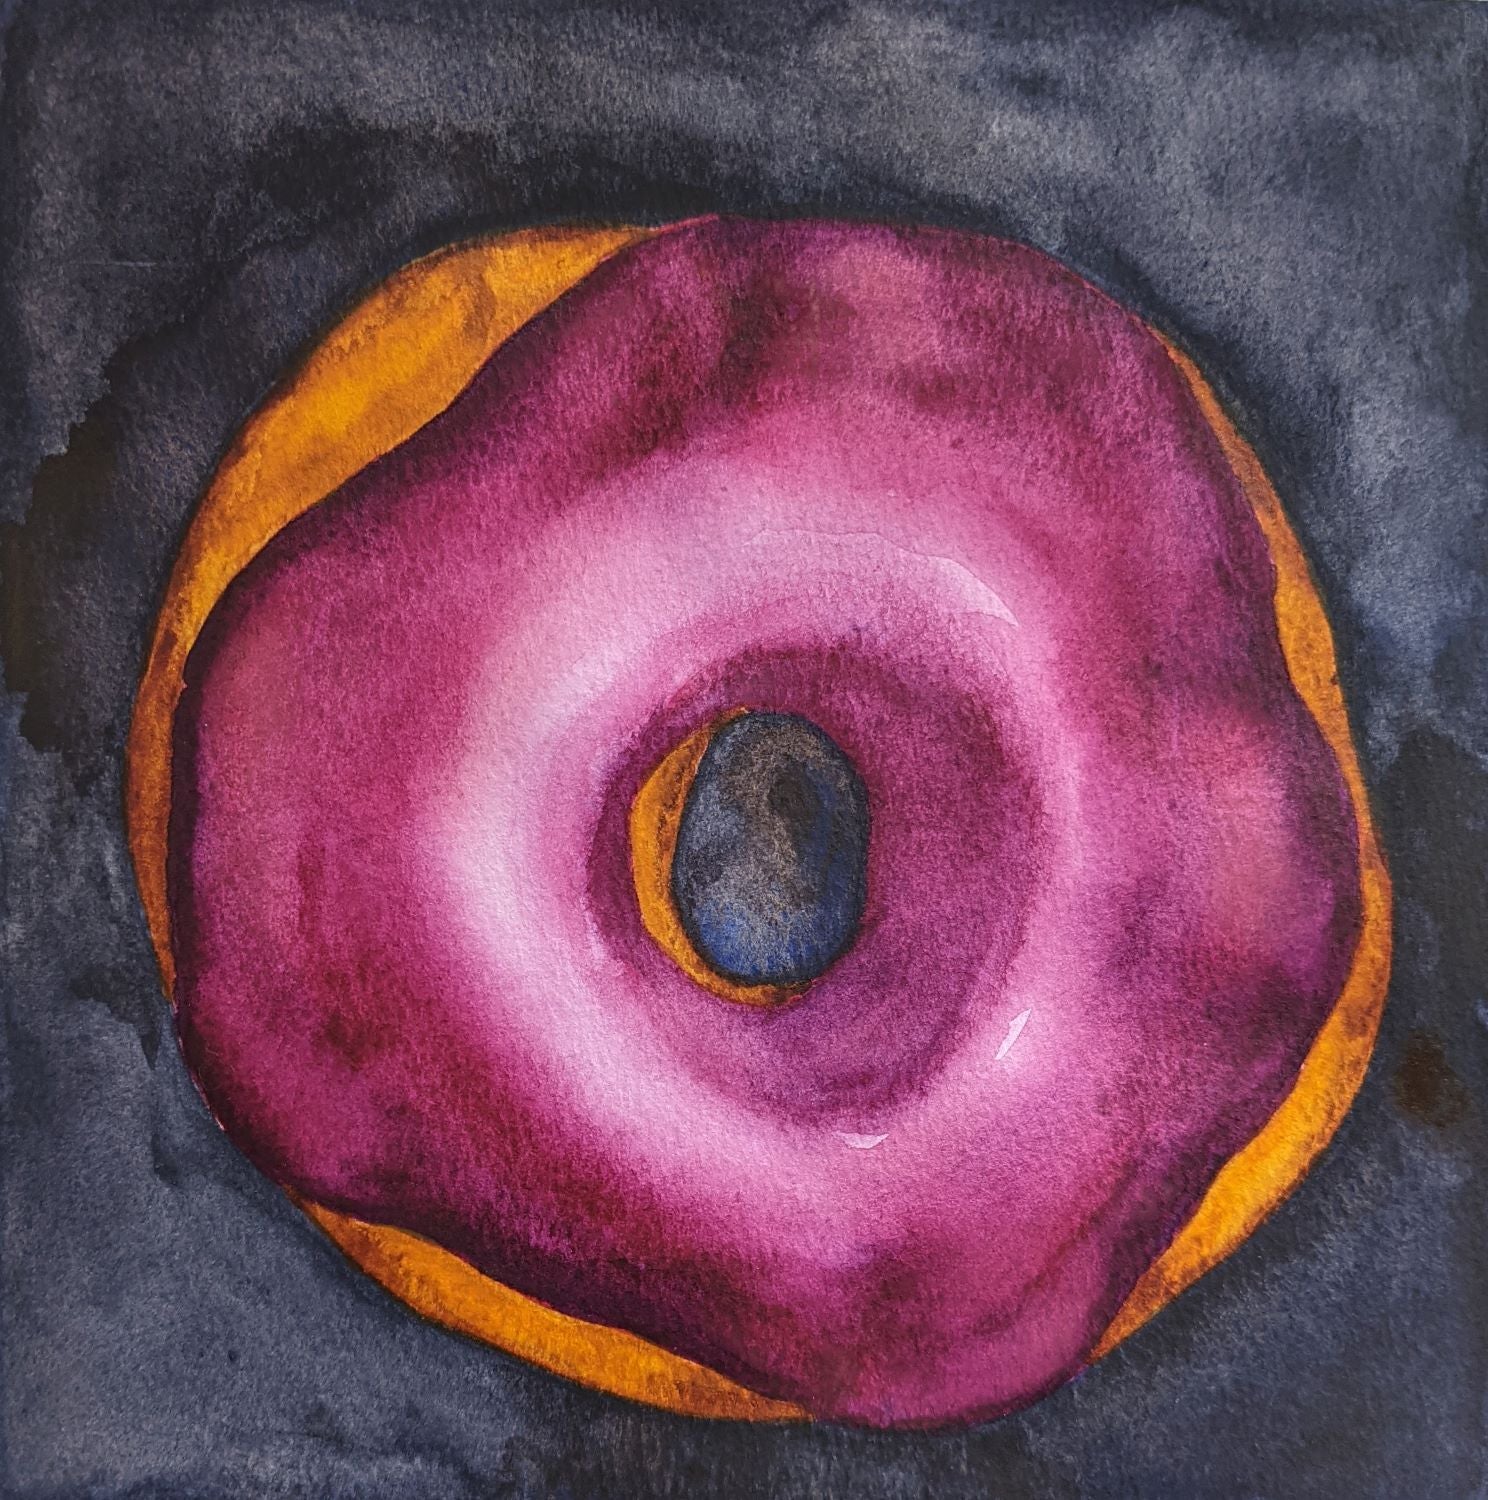 Glazed Purple donut watercolor painting on paper